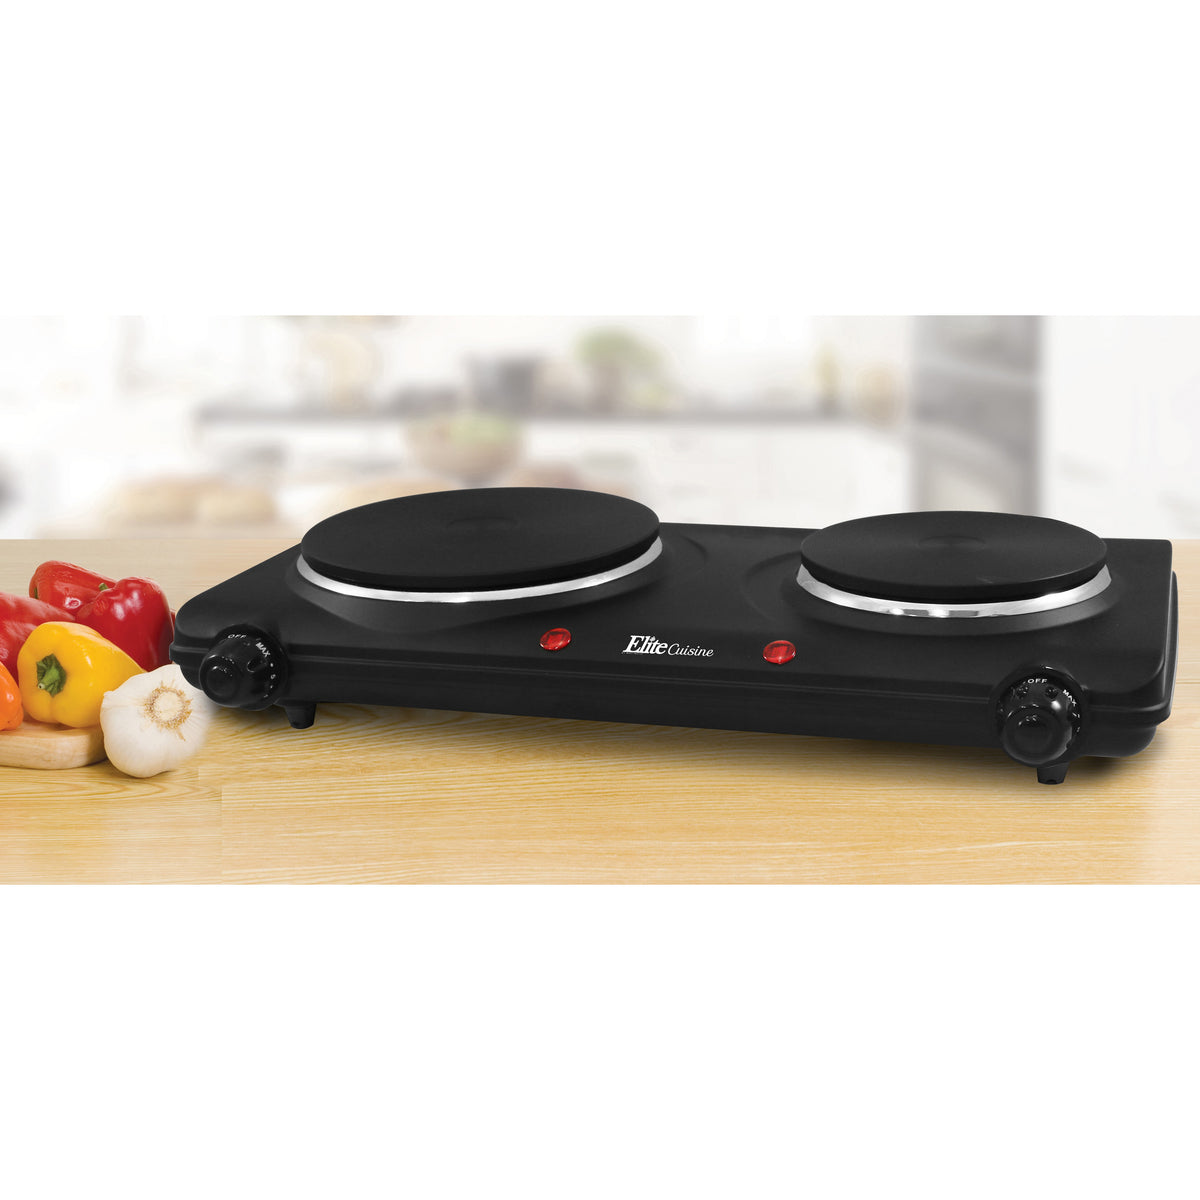 Elite 18.5-in 2 Elements Metal Electric Hot Plate at